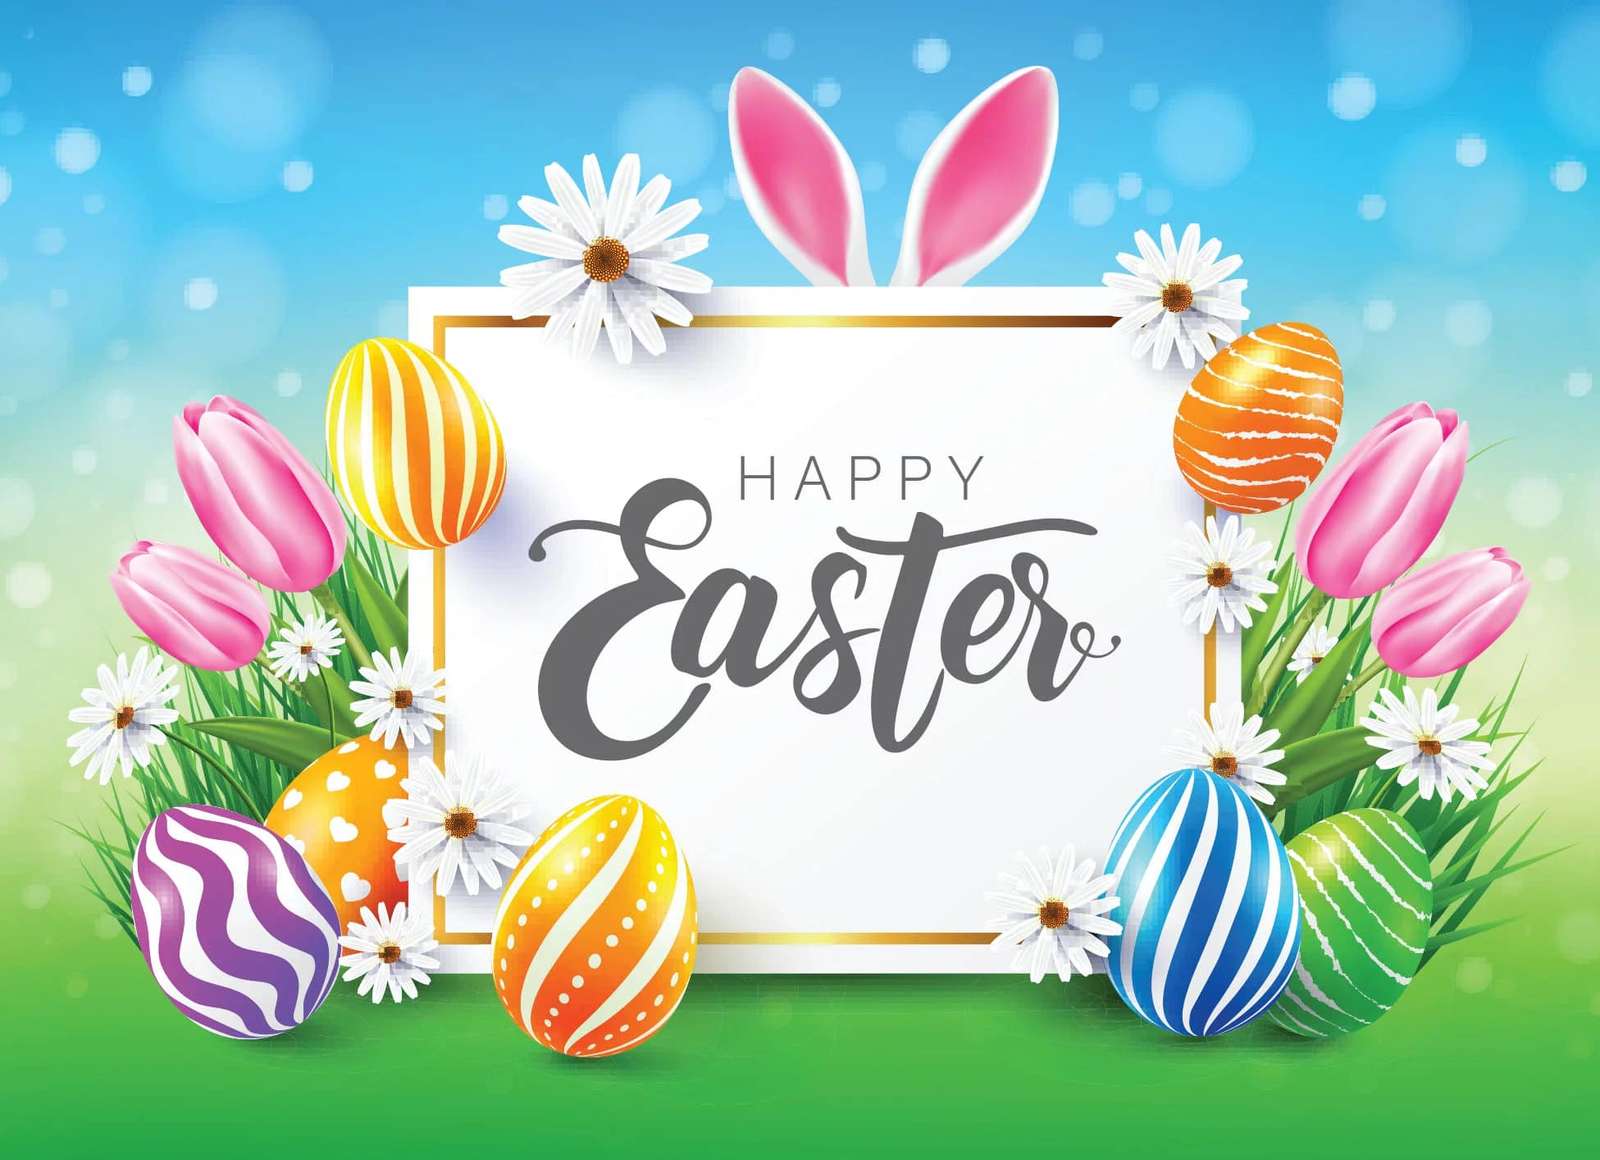 Happy Easter online puzzle